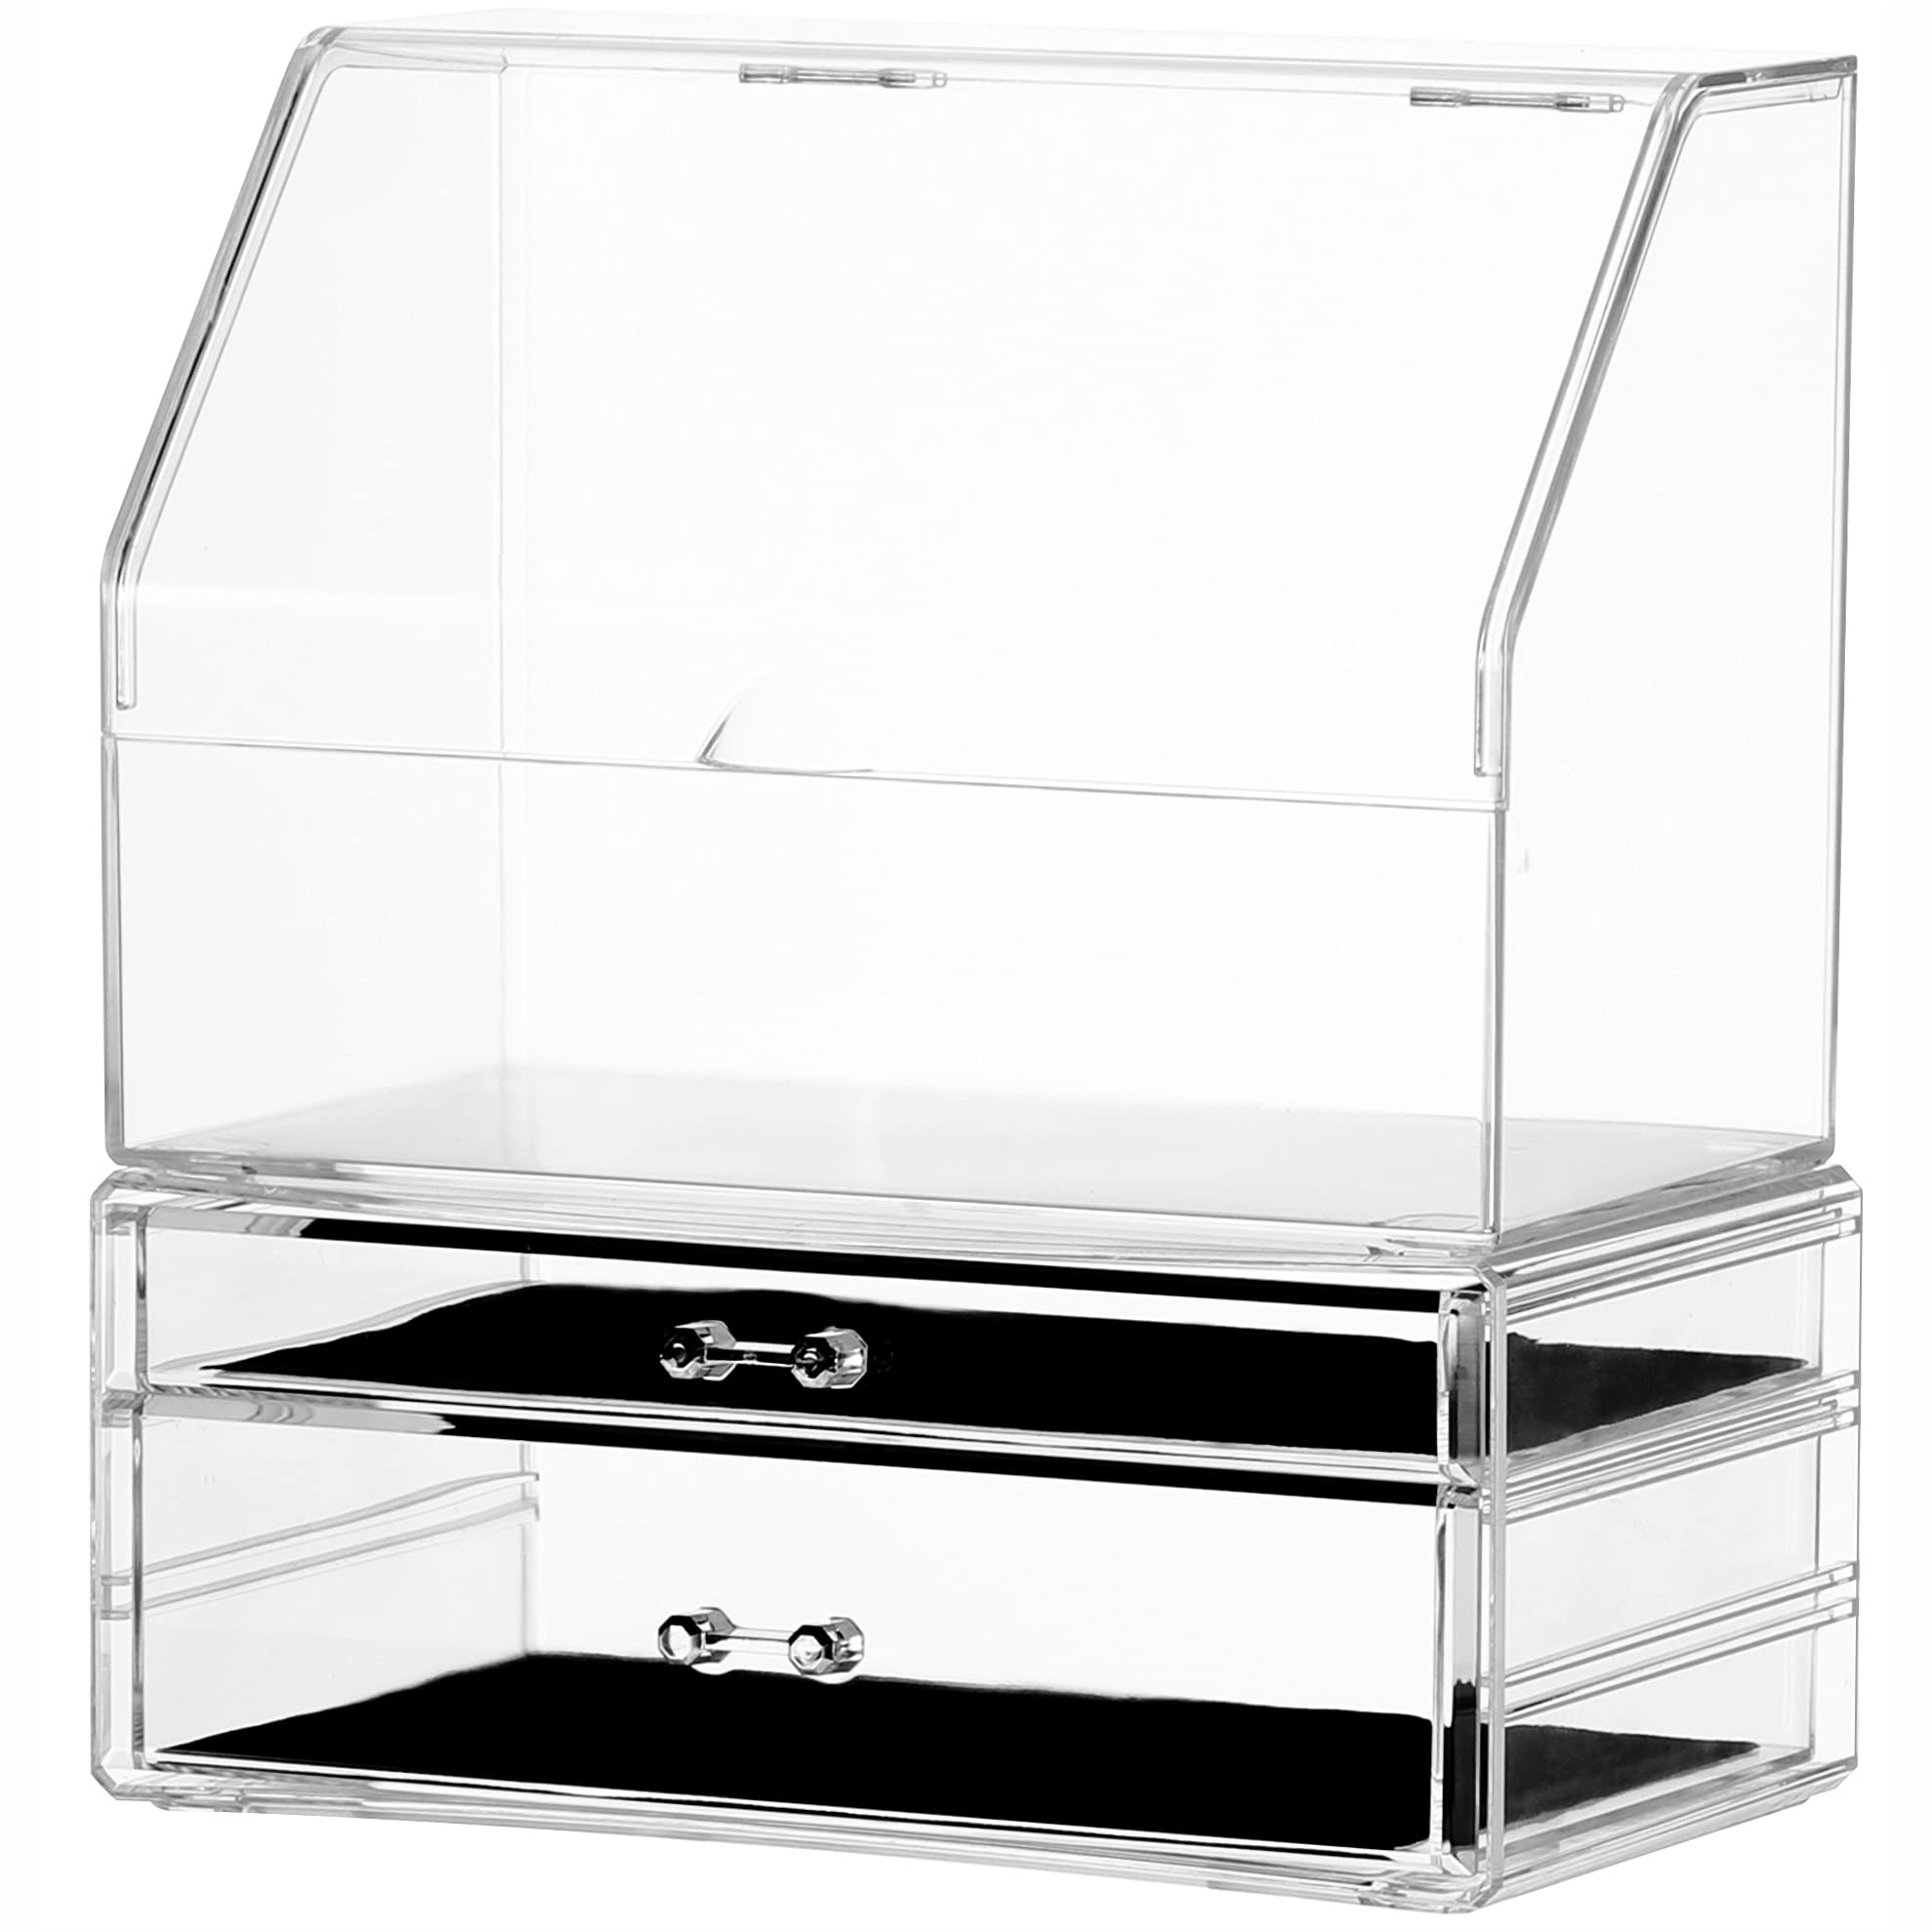 Cq acrylic Cosmetic Display Cases with LId Dustproof Waterproof for Bathroom Countertop Stackable Clear Makeup Organizer and Storage with 2 Drawers,Set of 2